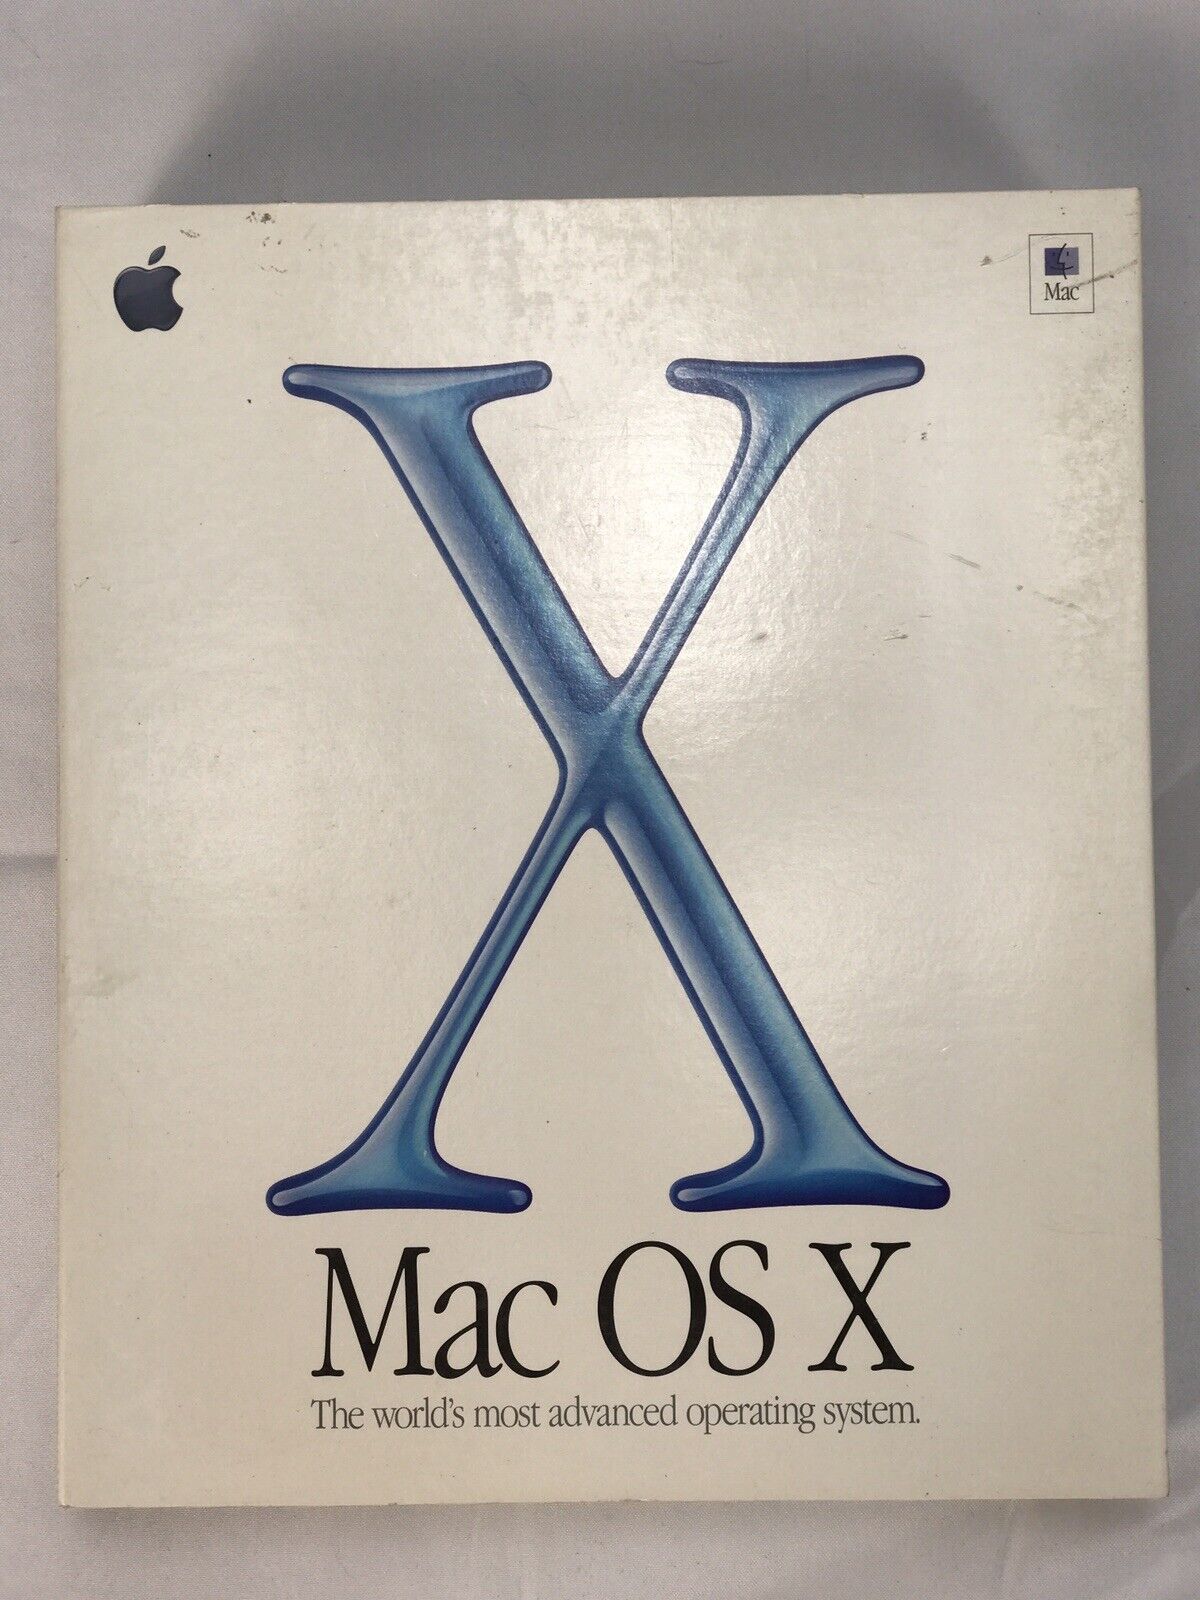 Apple Mac OS X Version 10.0 - First Commercial Version of OS X  - Sealed